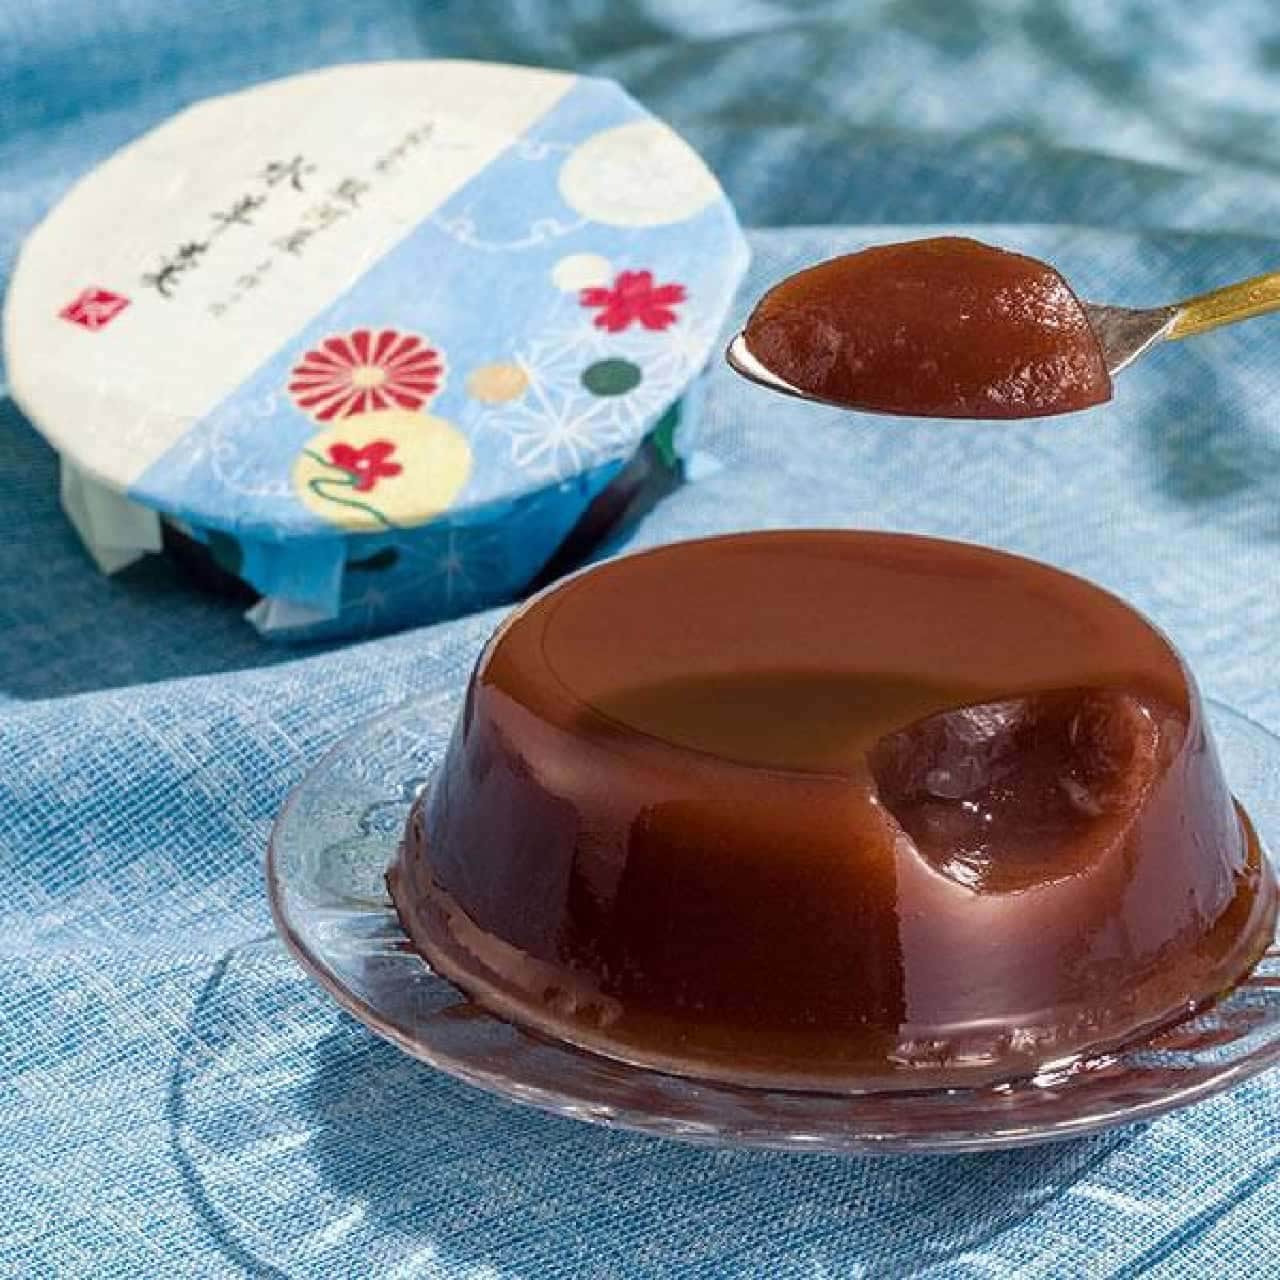 A special feature on Japanese sweets available at KALDI (KALDI)!